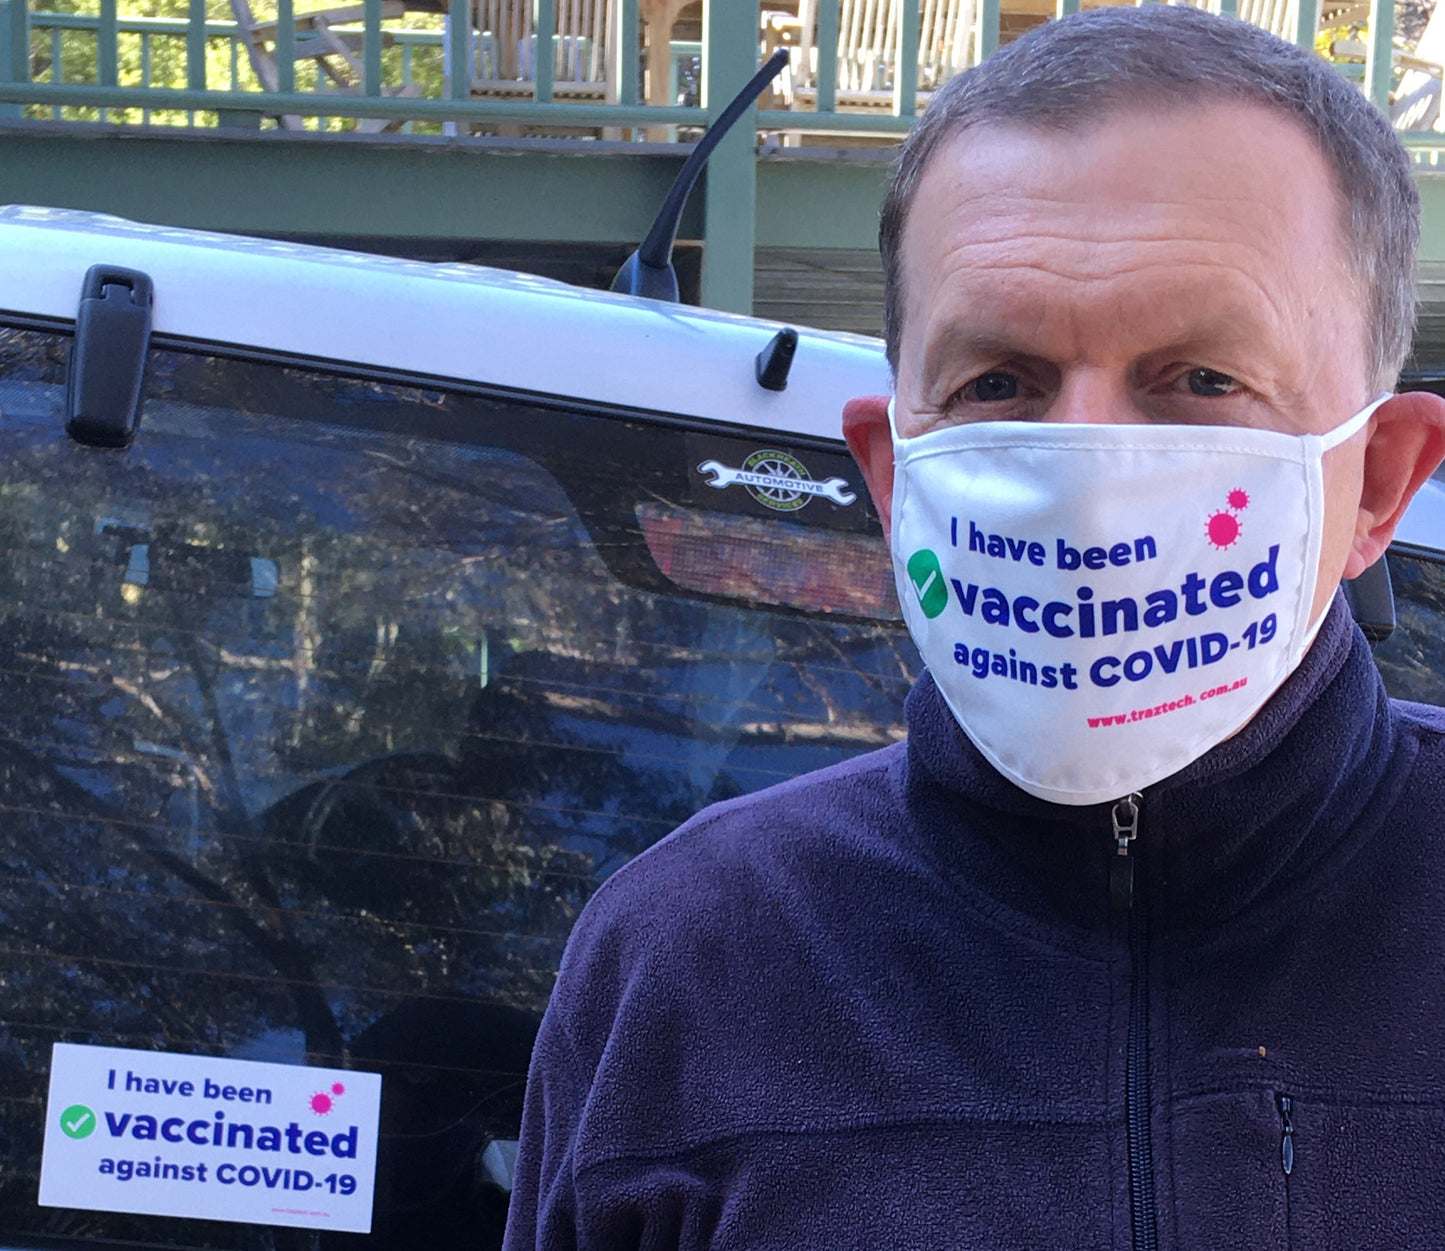 "I have been vaccinated" face mask, sticker and hand sanitizer